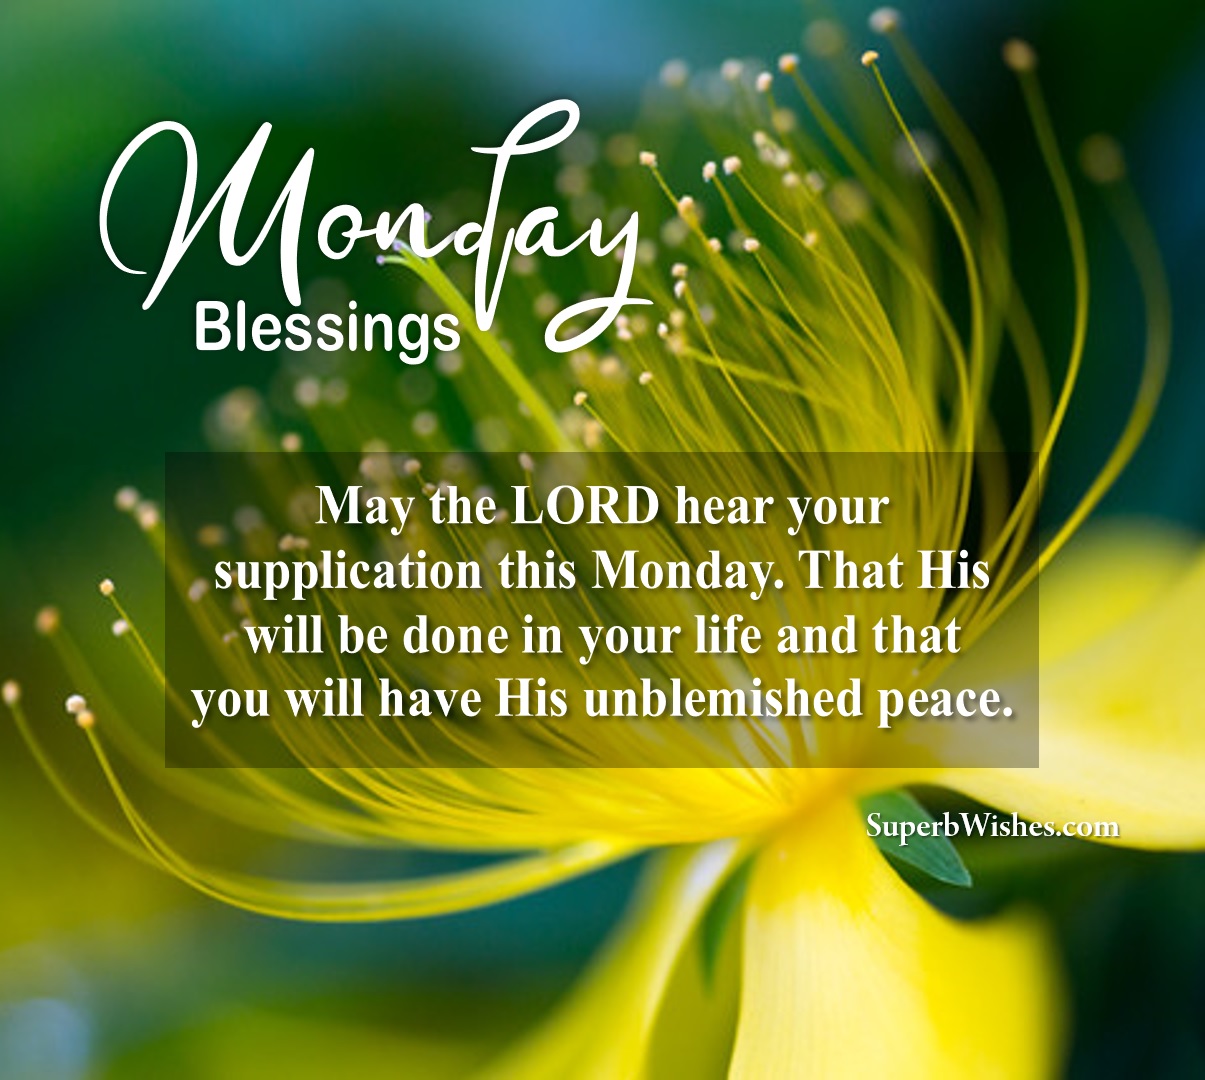 Monday blessings quotes. Superbwishes.com